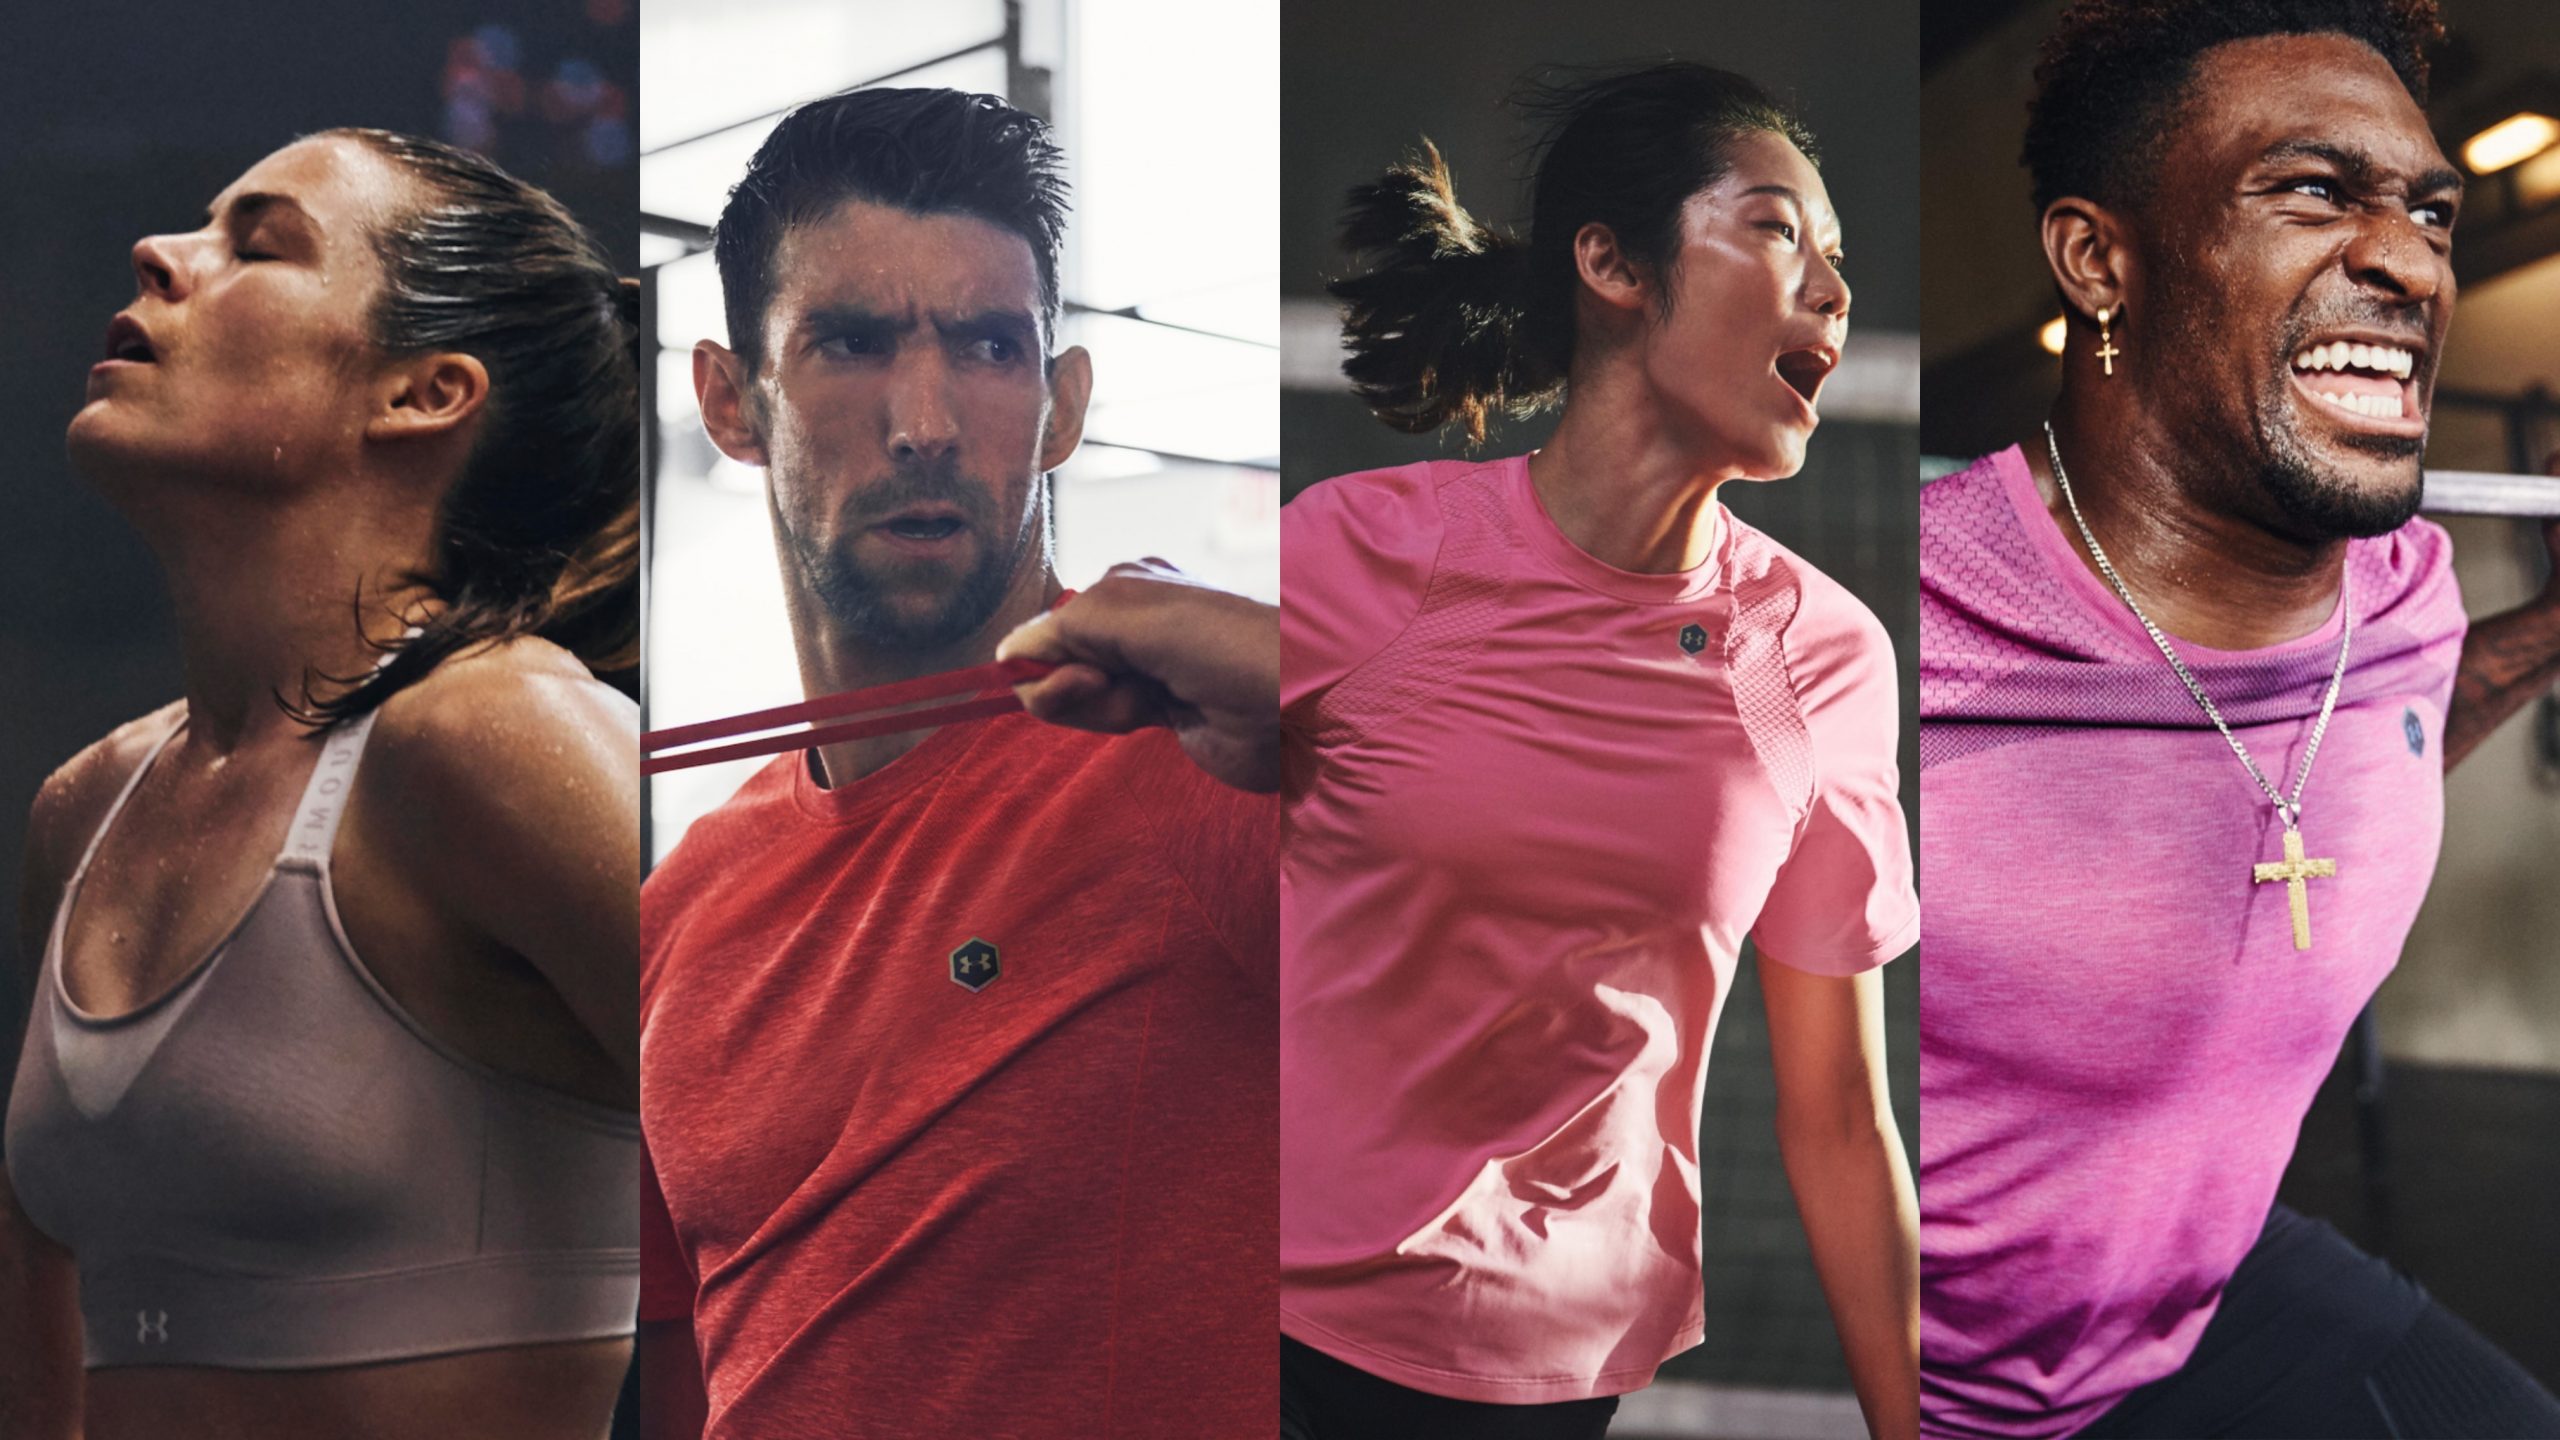 Introducing Under Armour's 2020 Global Brand Platform—The Only Way Is ...